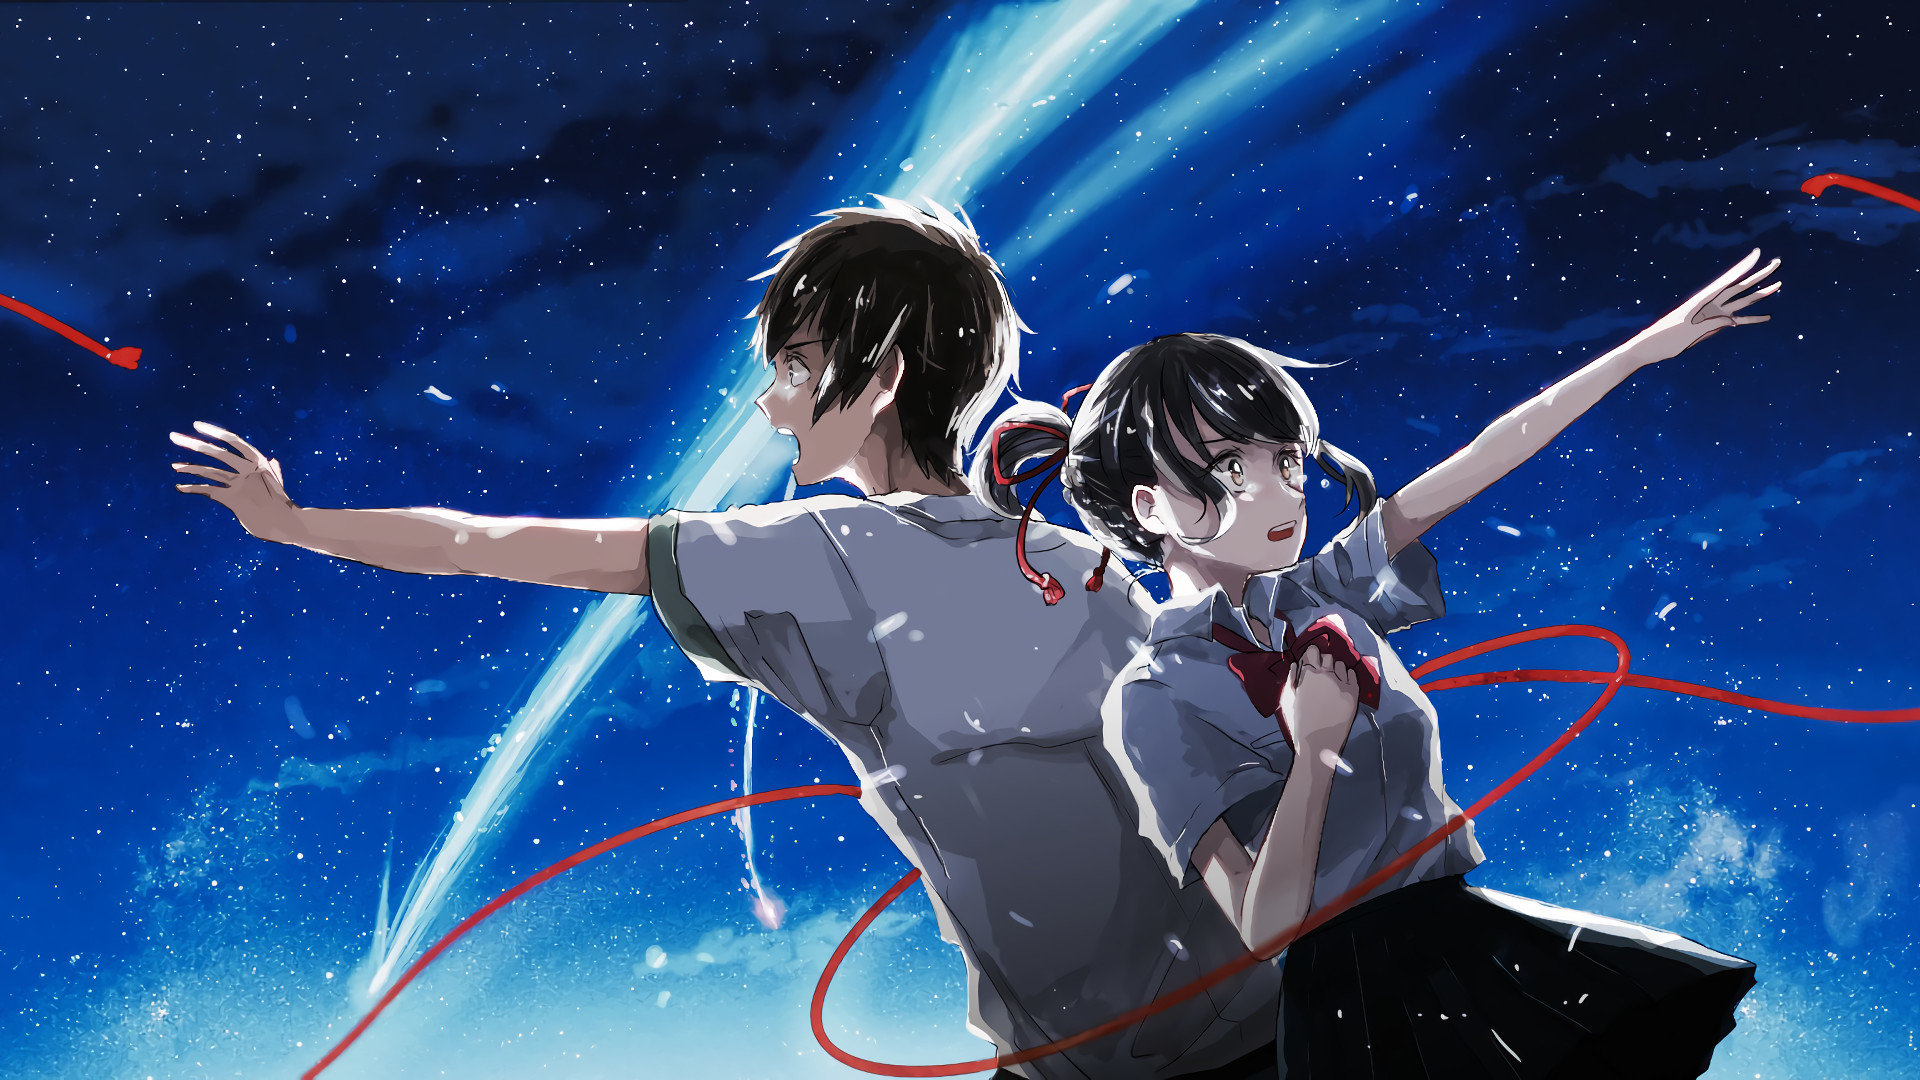 Hd Wallpapers 1920x1080 Your Name - HD Wallpaper 